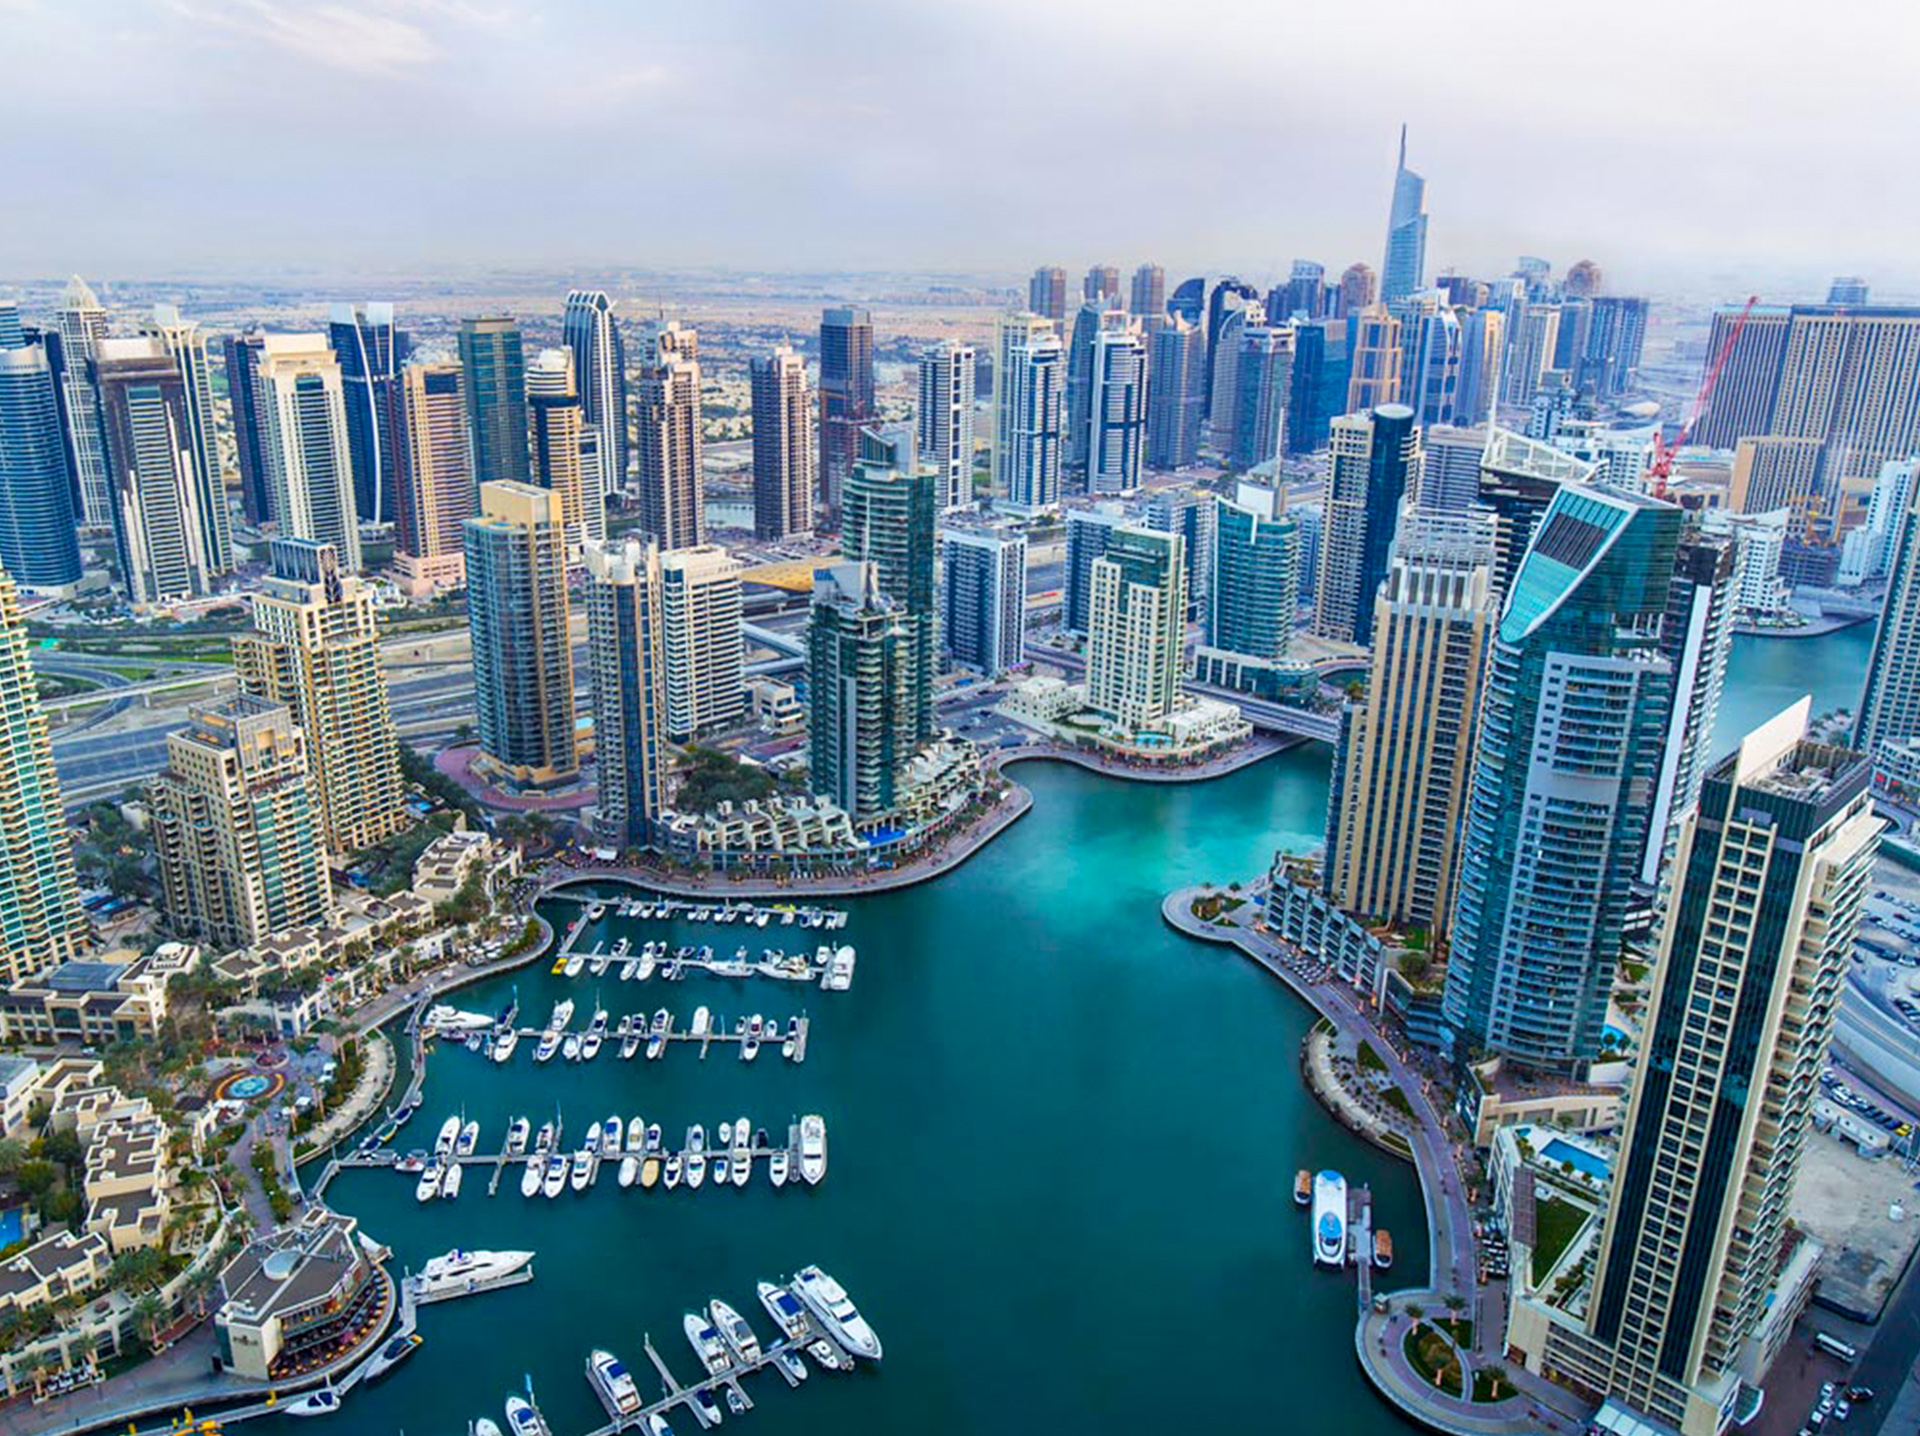 Real estate transactions in Dubai climb to $462.8 million on Wednesday as property demand soars